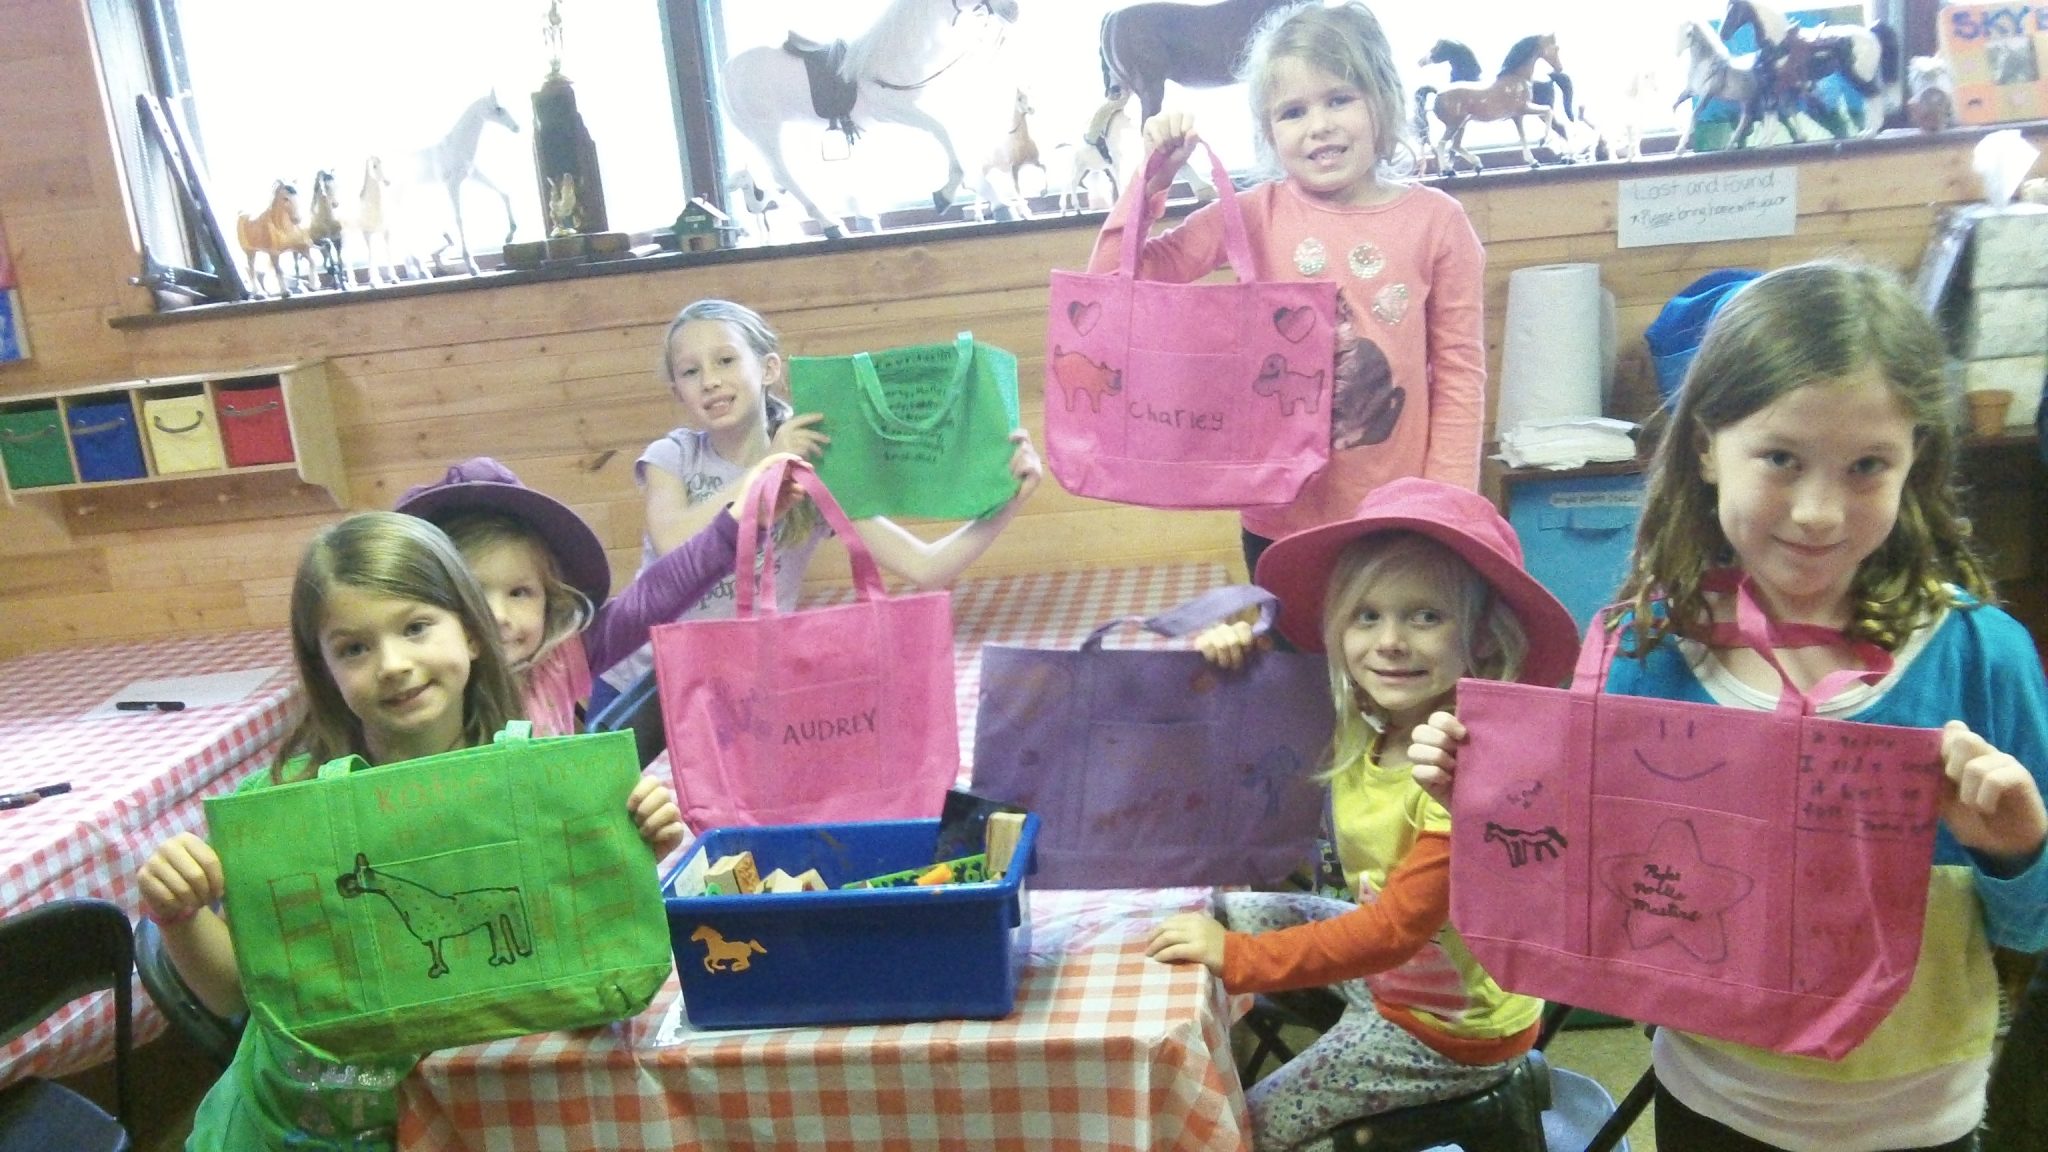 Kids holding up decorated bags.